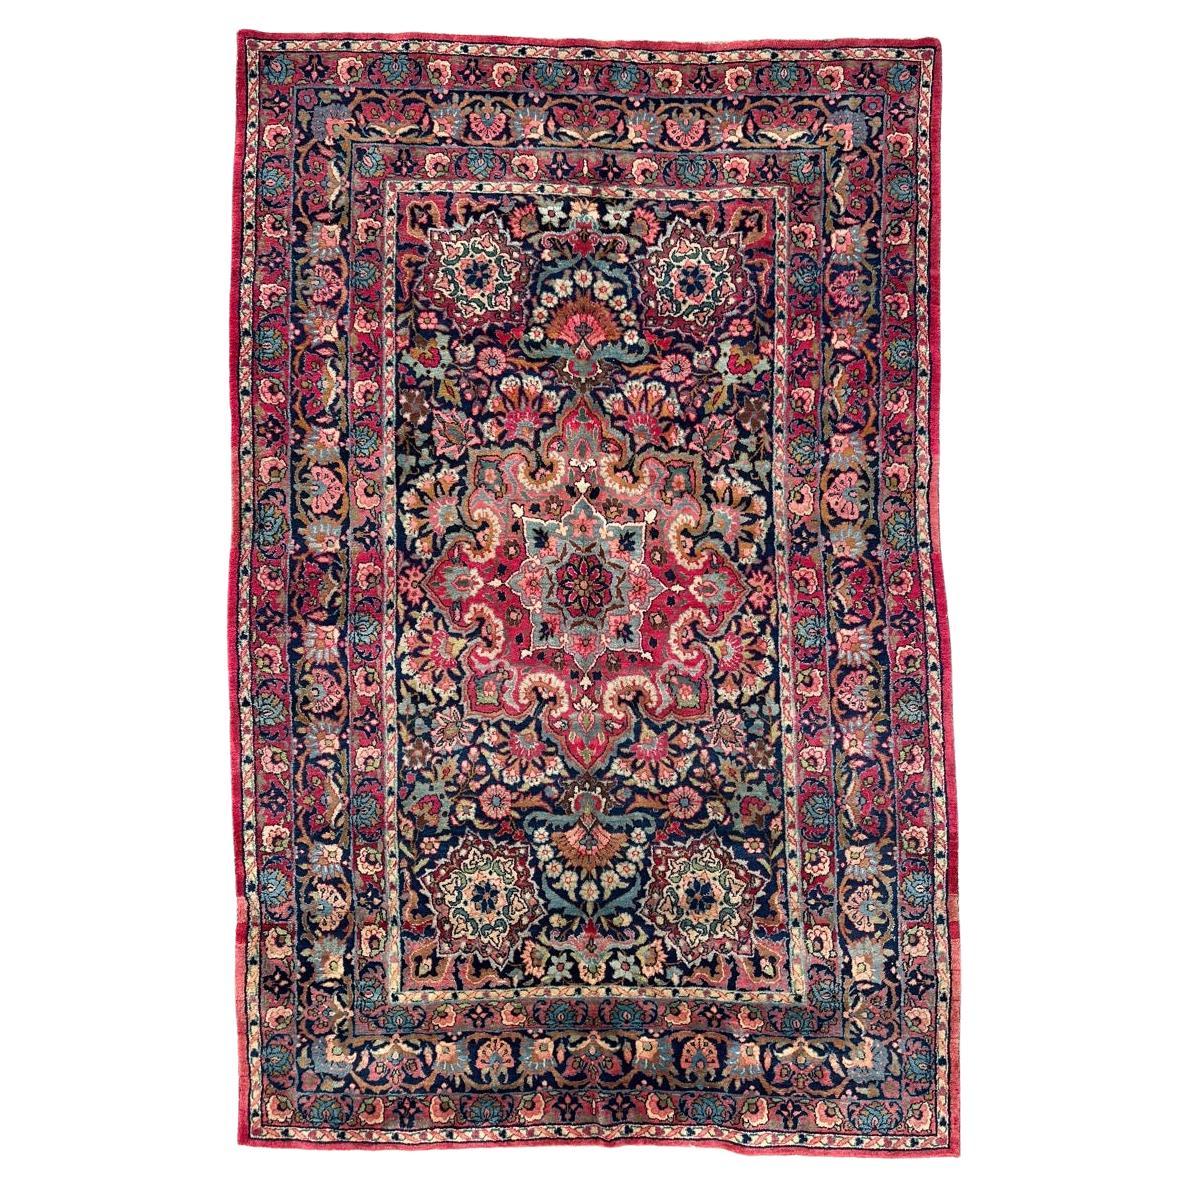 Bobyrug’s magnificent antique 19th century Isfahan rug  For Sale